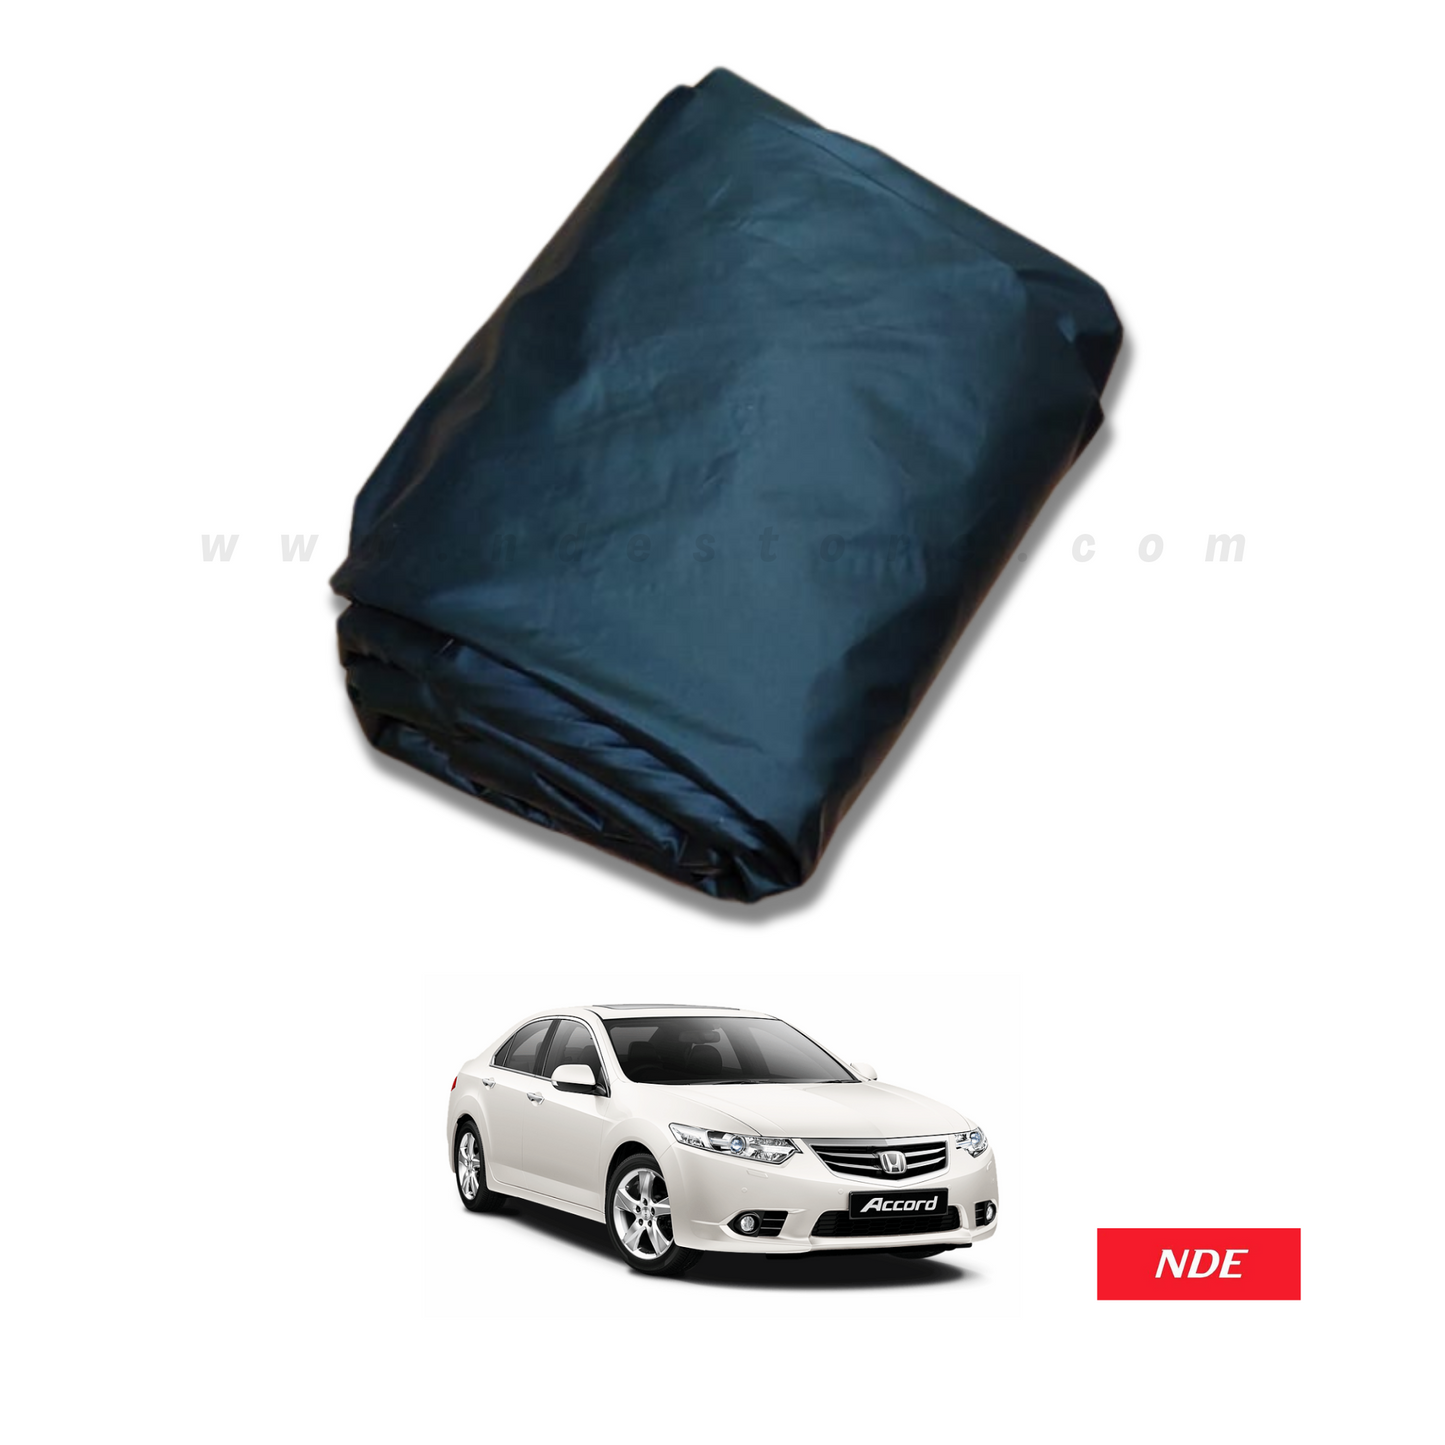 TOP COVER FOR HONDA ACCORD